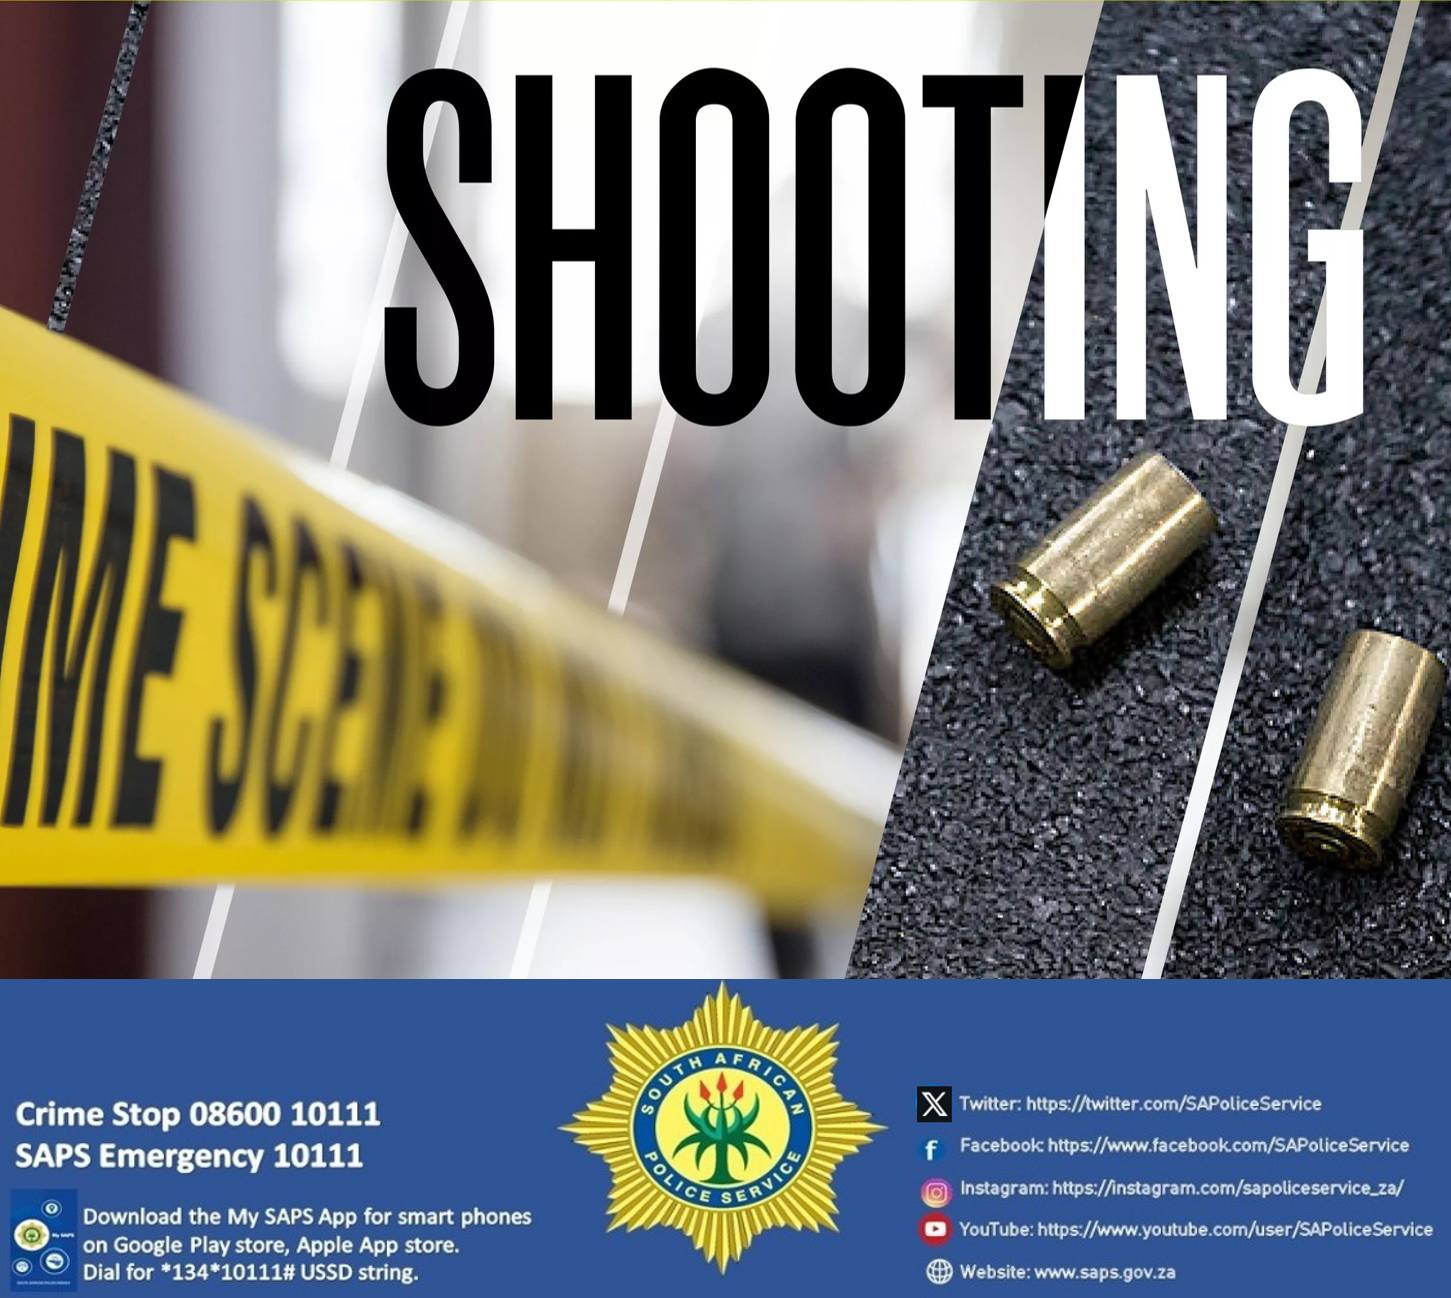 Police in Eastern Cape have launched a manhunt for suspects linked to the deadly shooting that took place